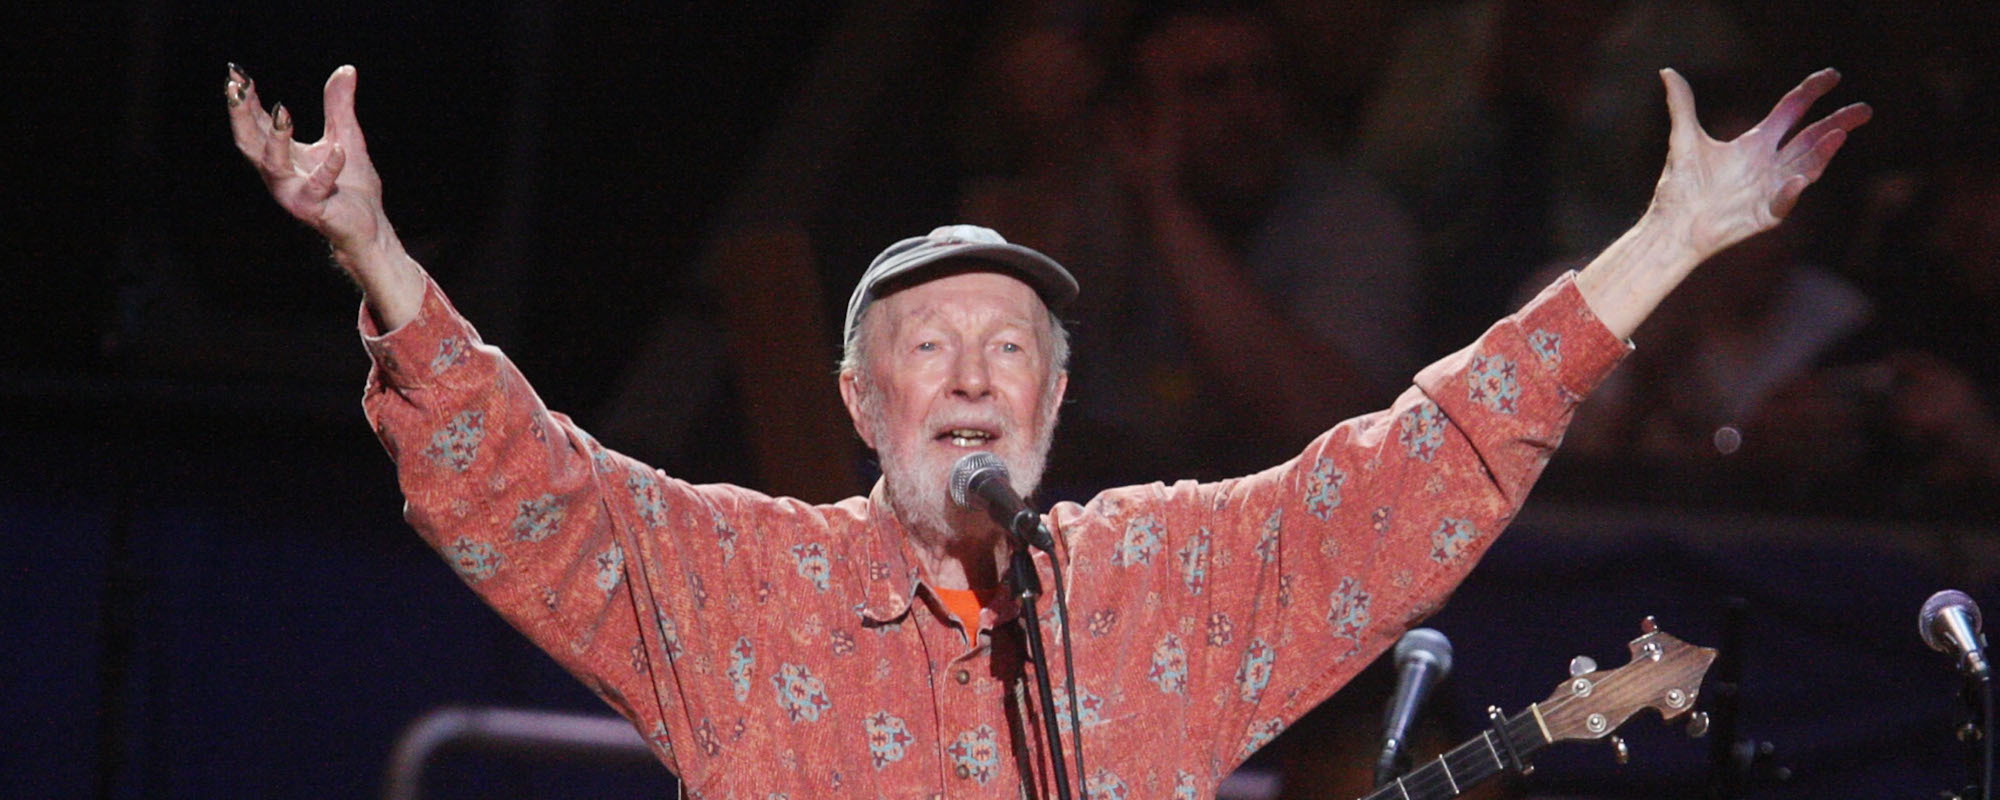 The 15 Best Pete Seeger Quotes: “It’s a Very Important Thing to Learn to Talk to People You Disagree With”